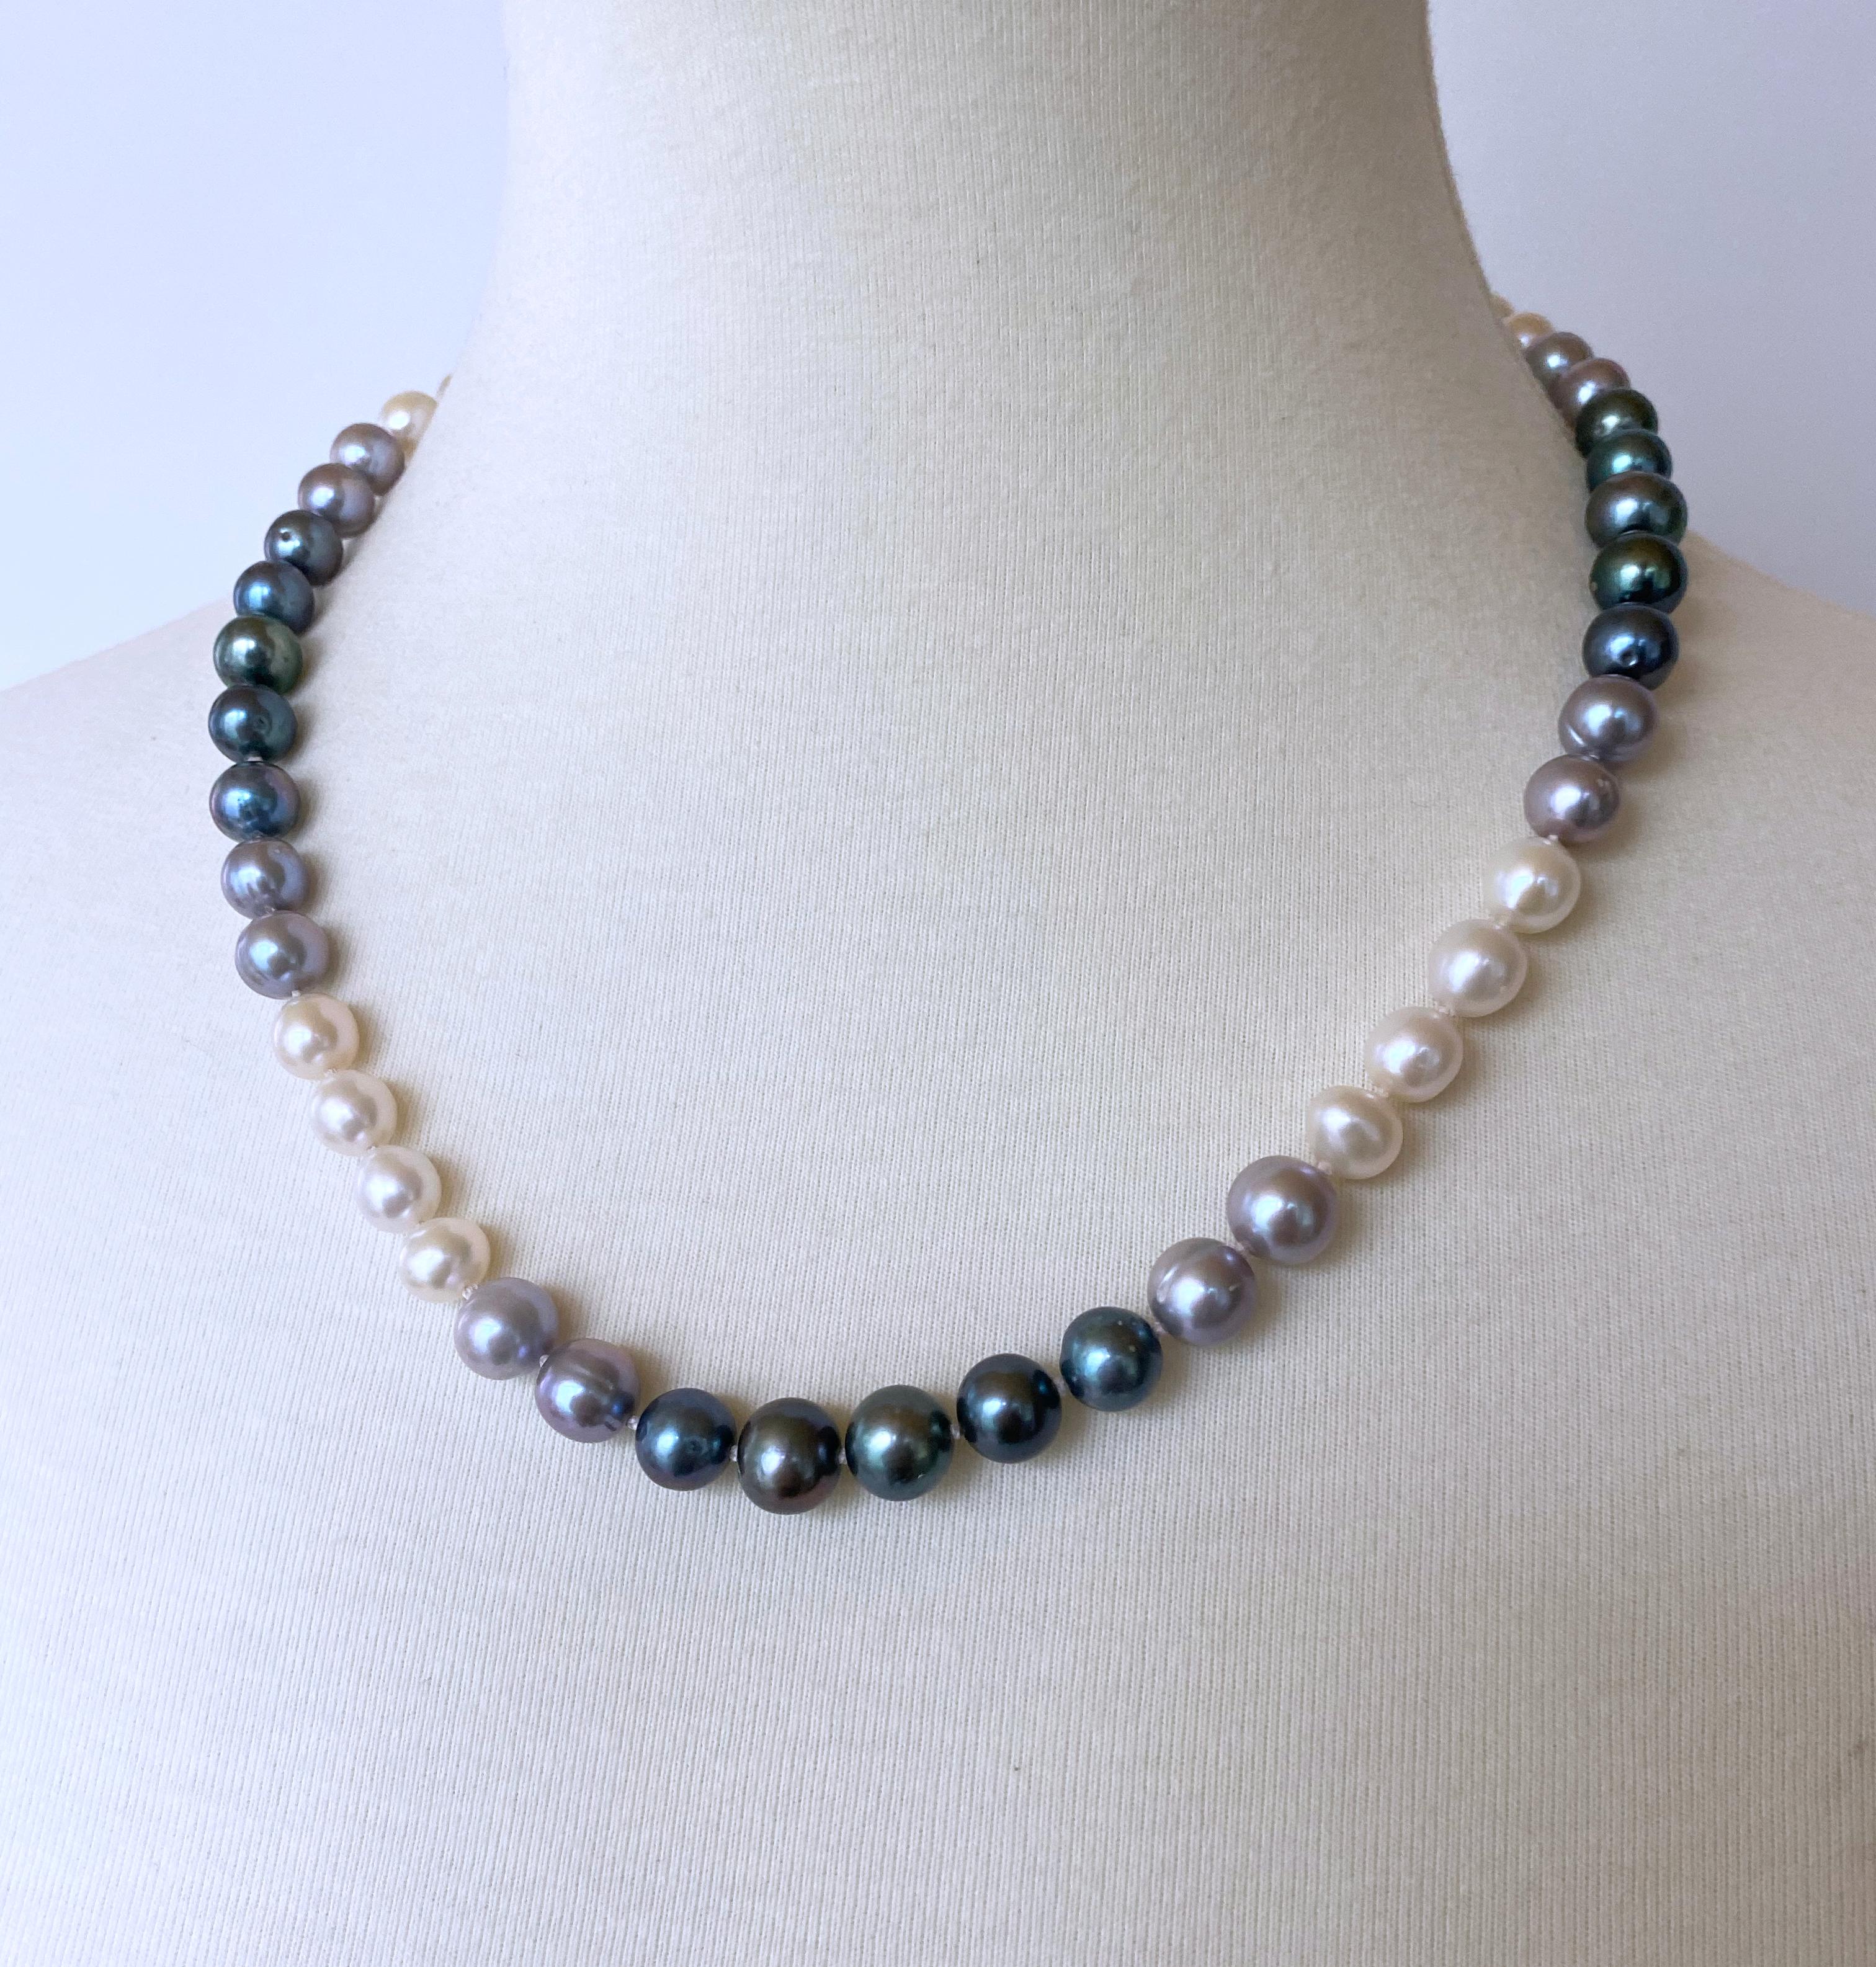 Gorgeous knotted Pearl Ombre necklace by Marina J. This beautiful piece features all Cultured White, Grey and Black Pearls which display radiant iridescence. Measuring 20.25 inches long, this necklace meets at a solid 14k Yellow Gold Ball clasp,